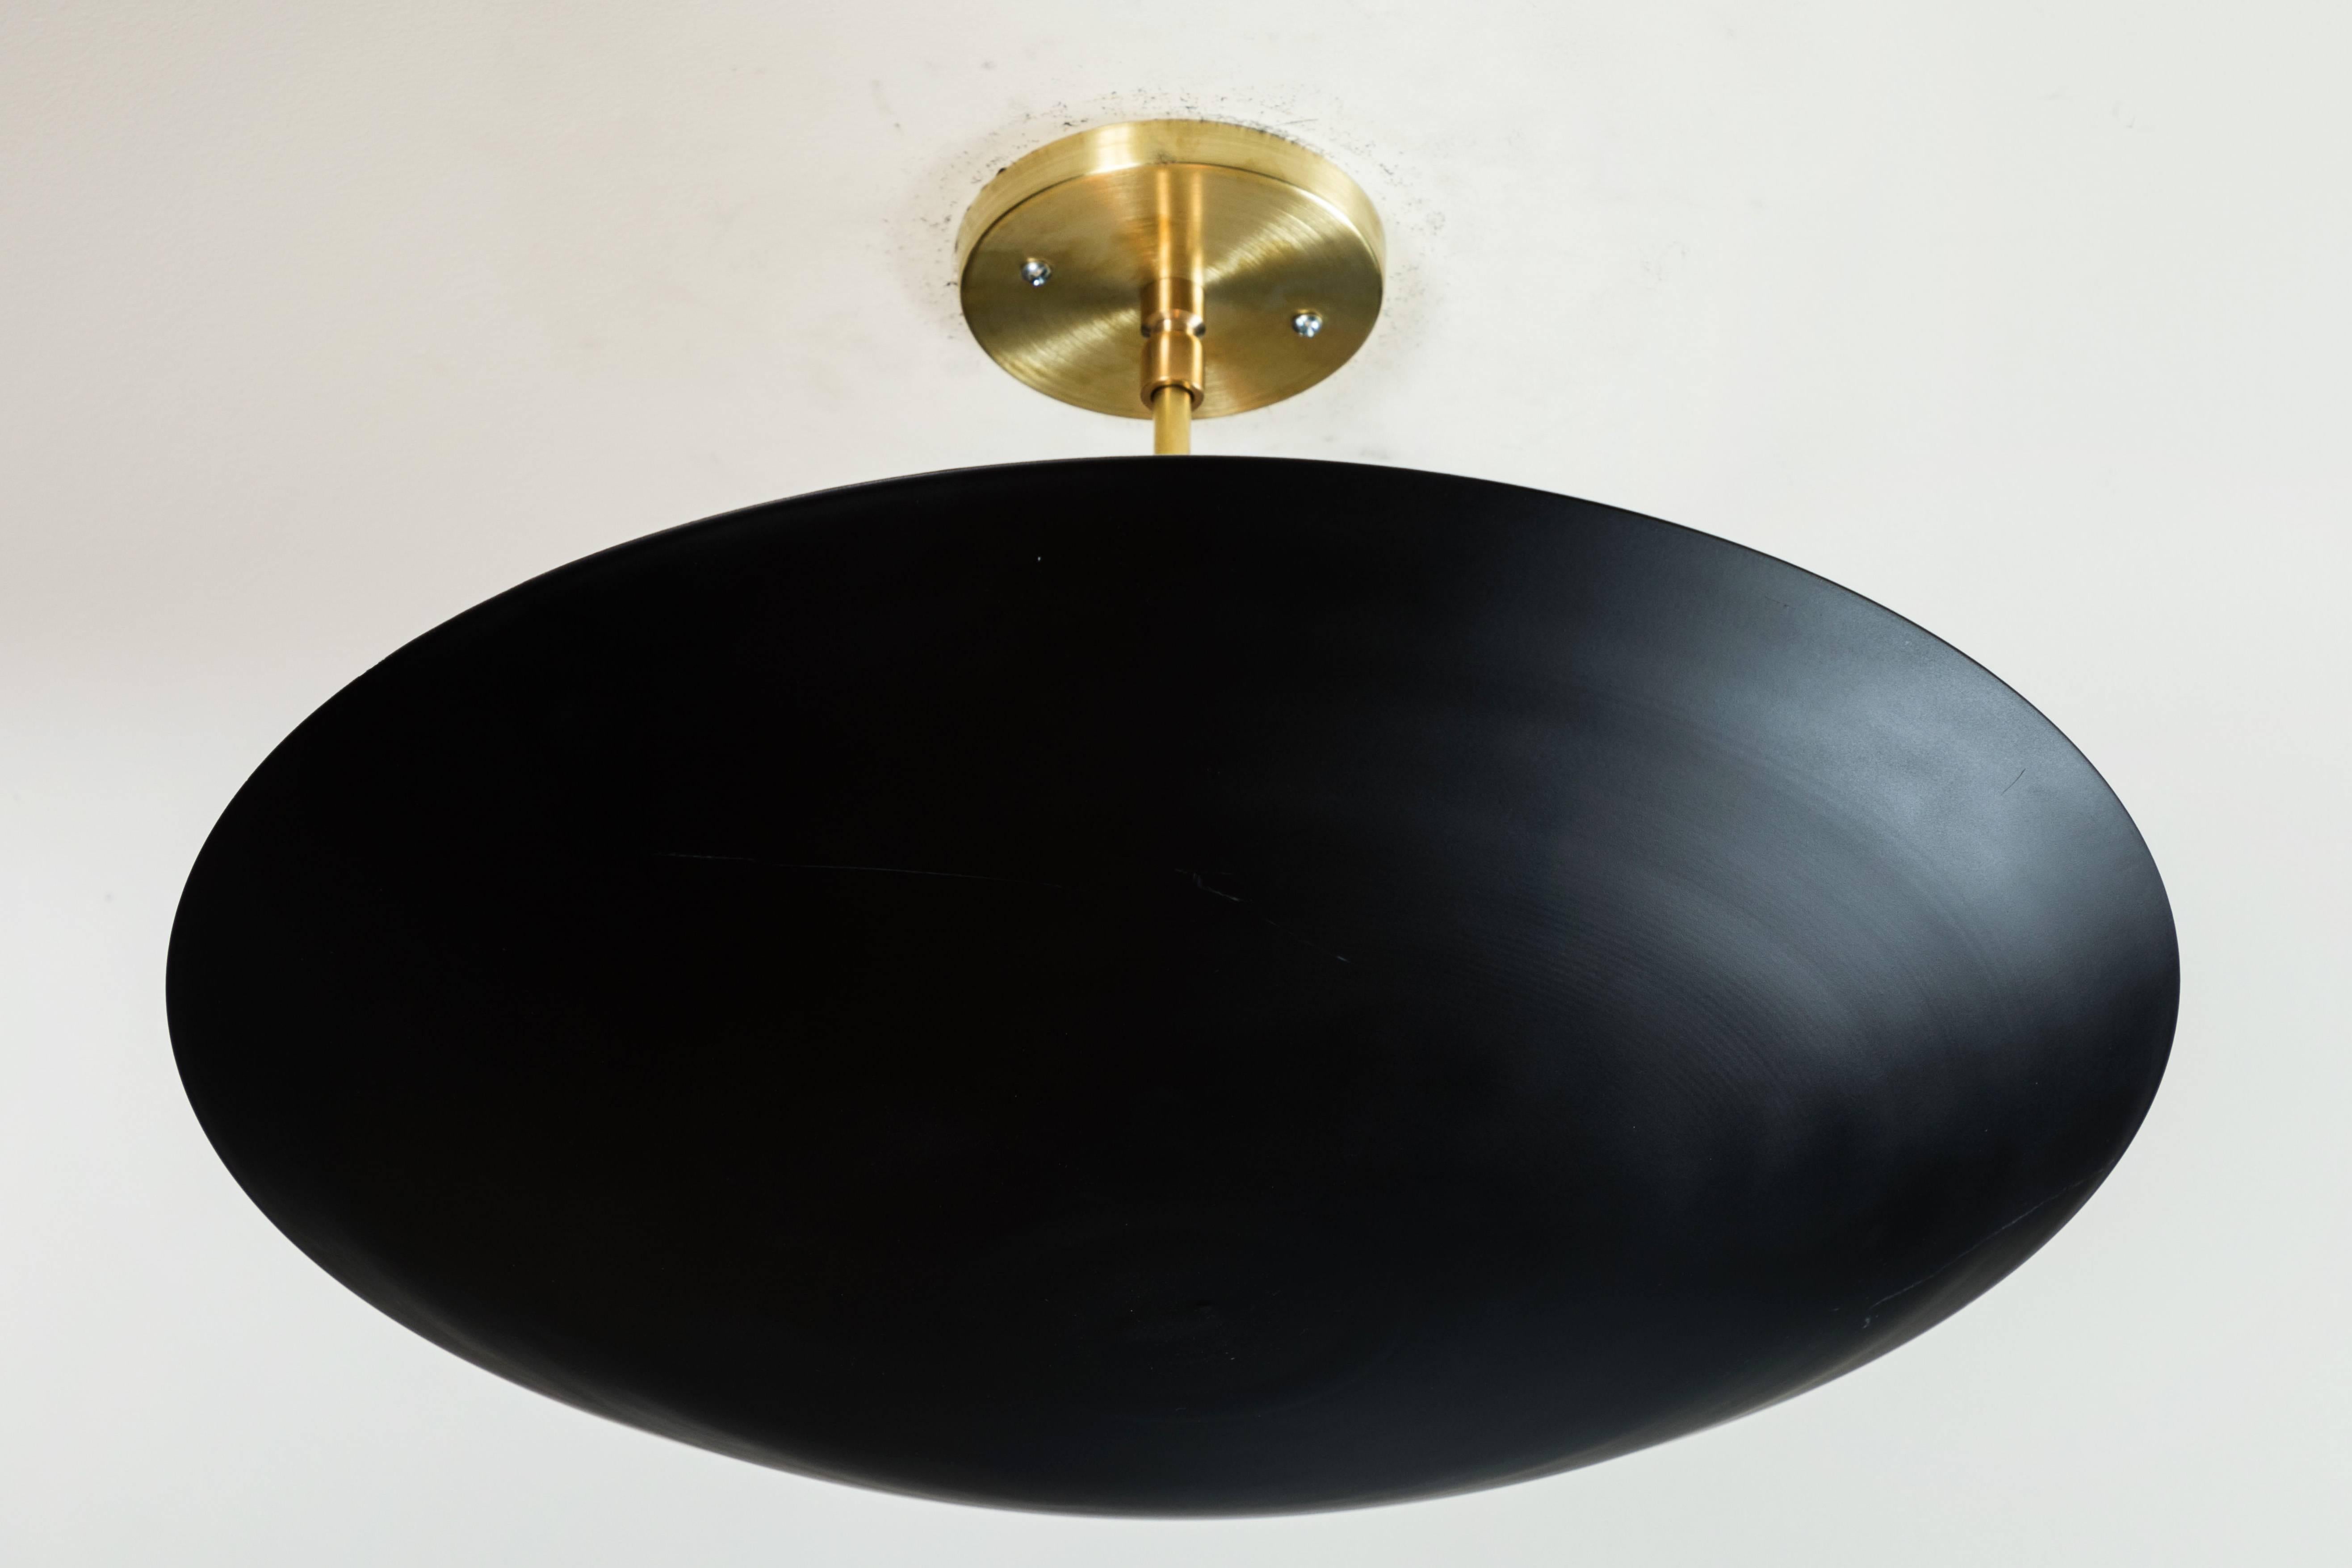 The Alta brass Dome features a spun metal shade with a brass canopy and rod. The shade is available in brass or powdercoated metal finishes. Shown here in matte black powdercoat and satin brass. 

The Lawson-Fenning Collection is designed and